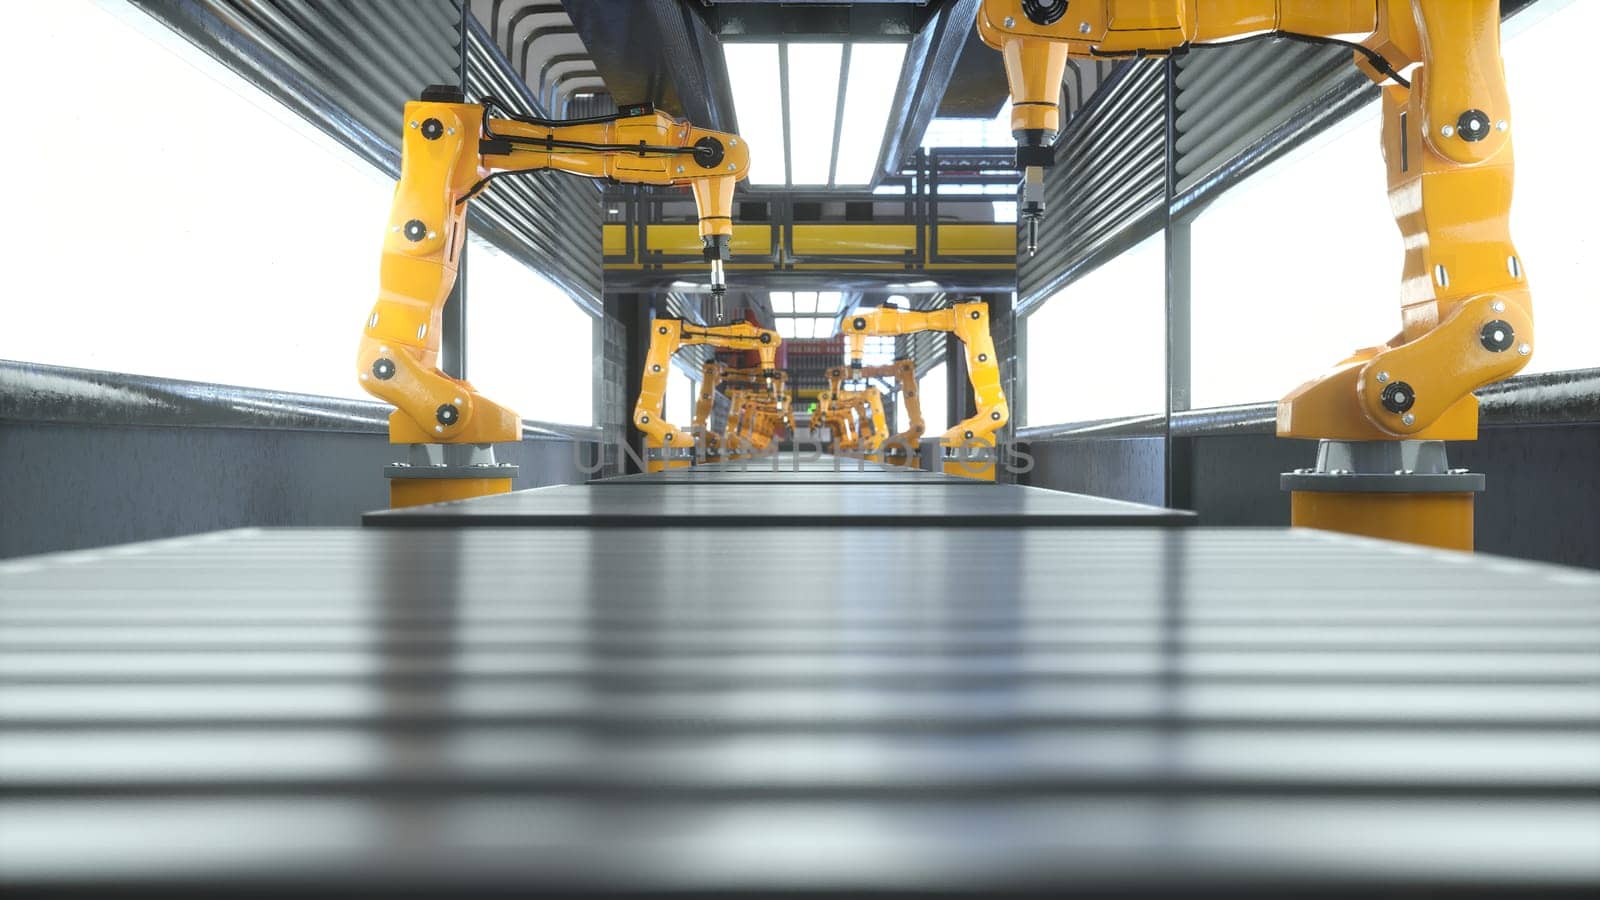 Automated factory with robot arms placing products on conveyor belts, 3D render by DCStudio